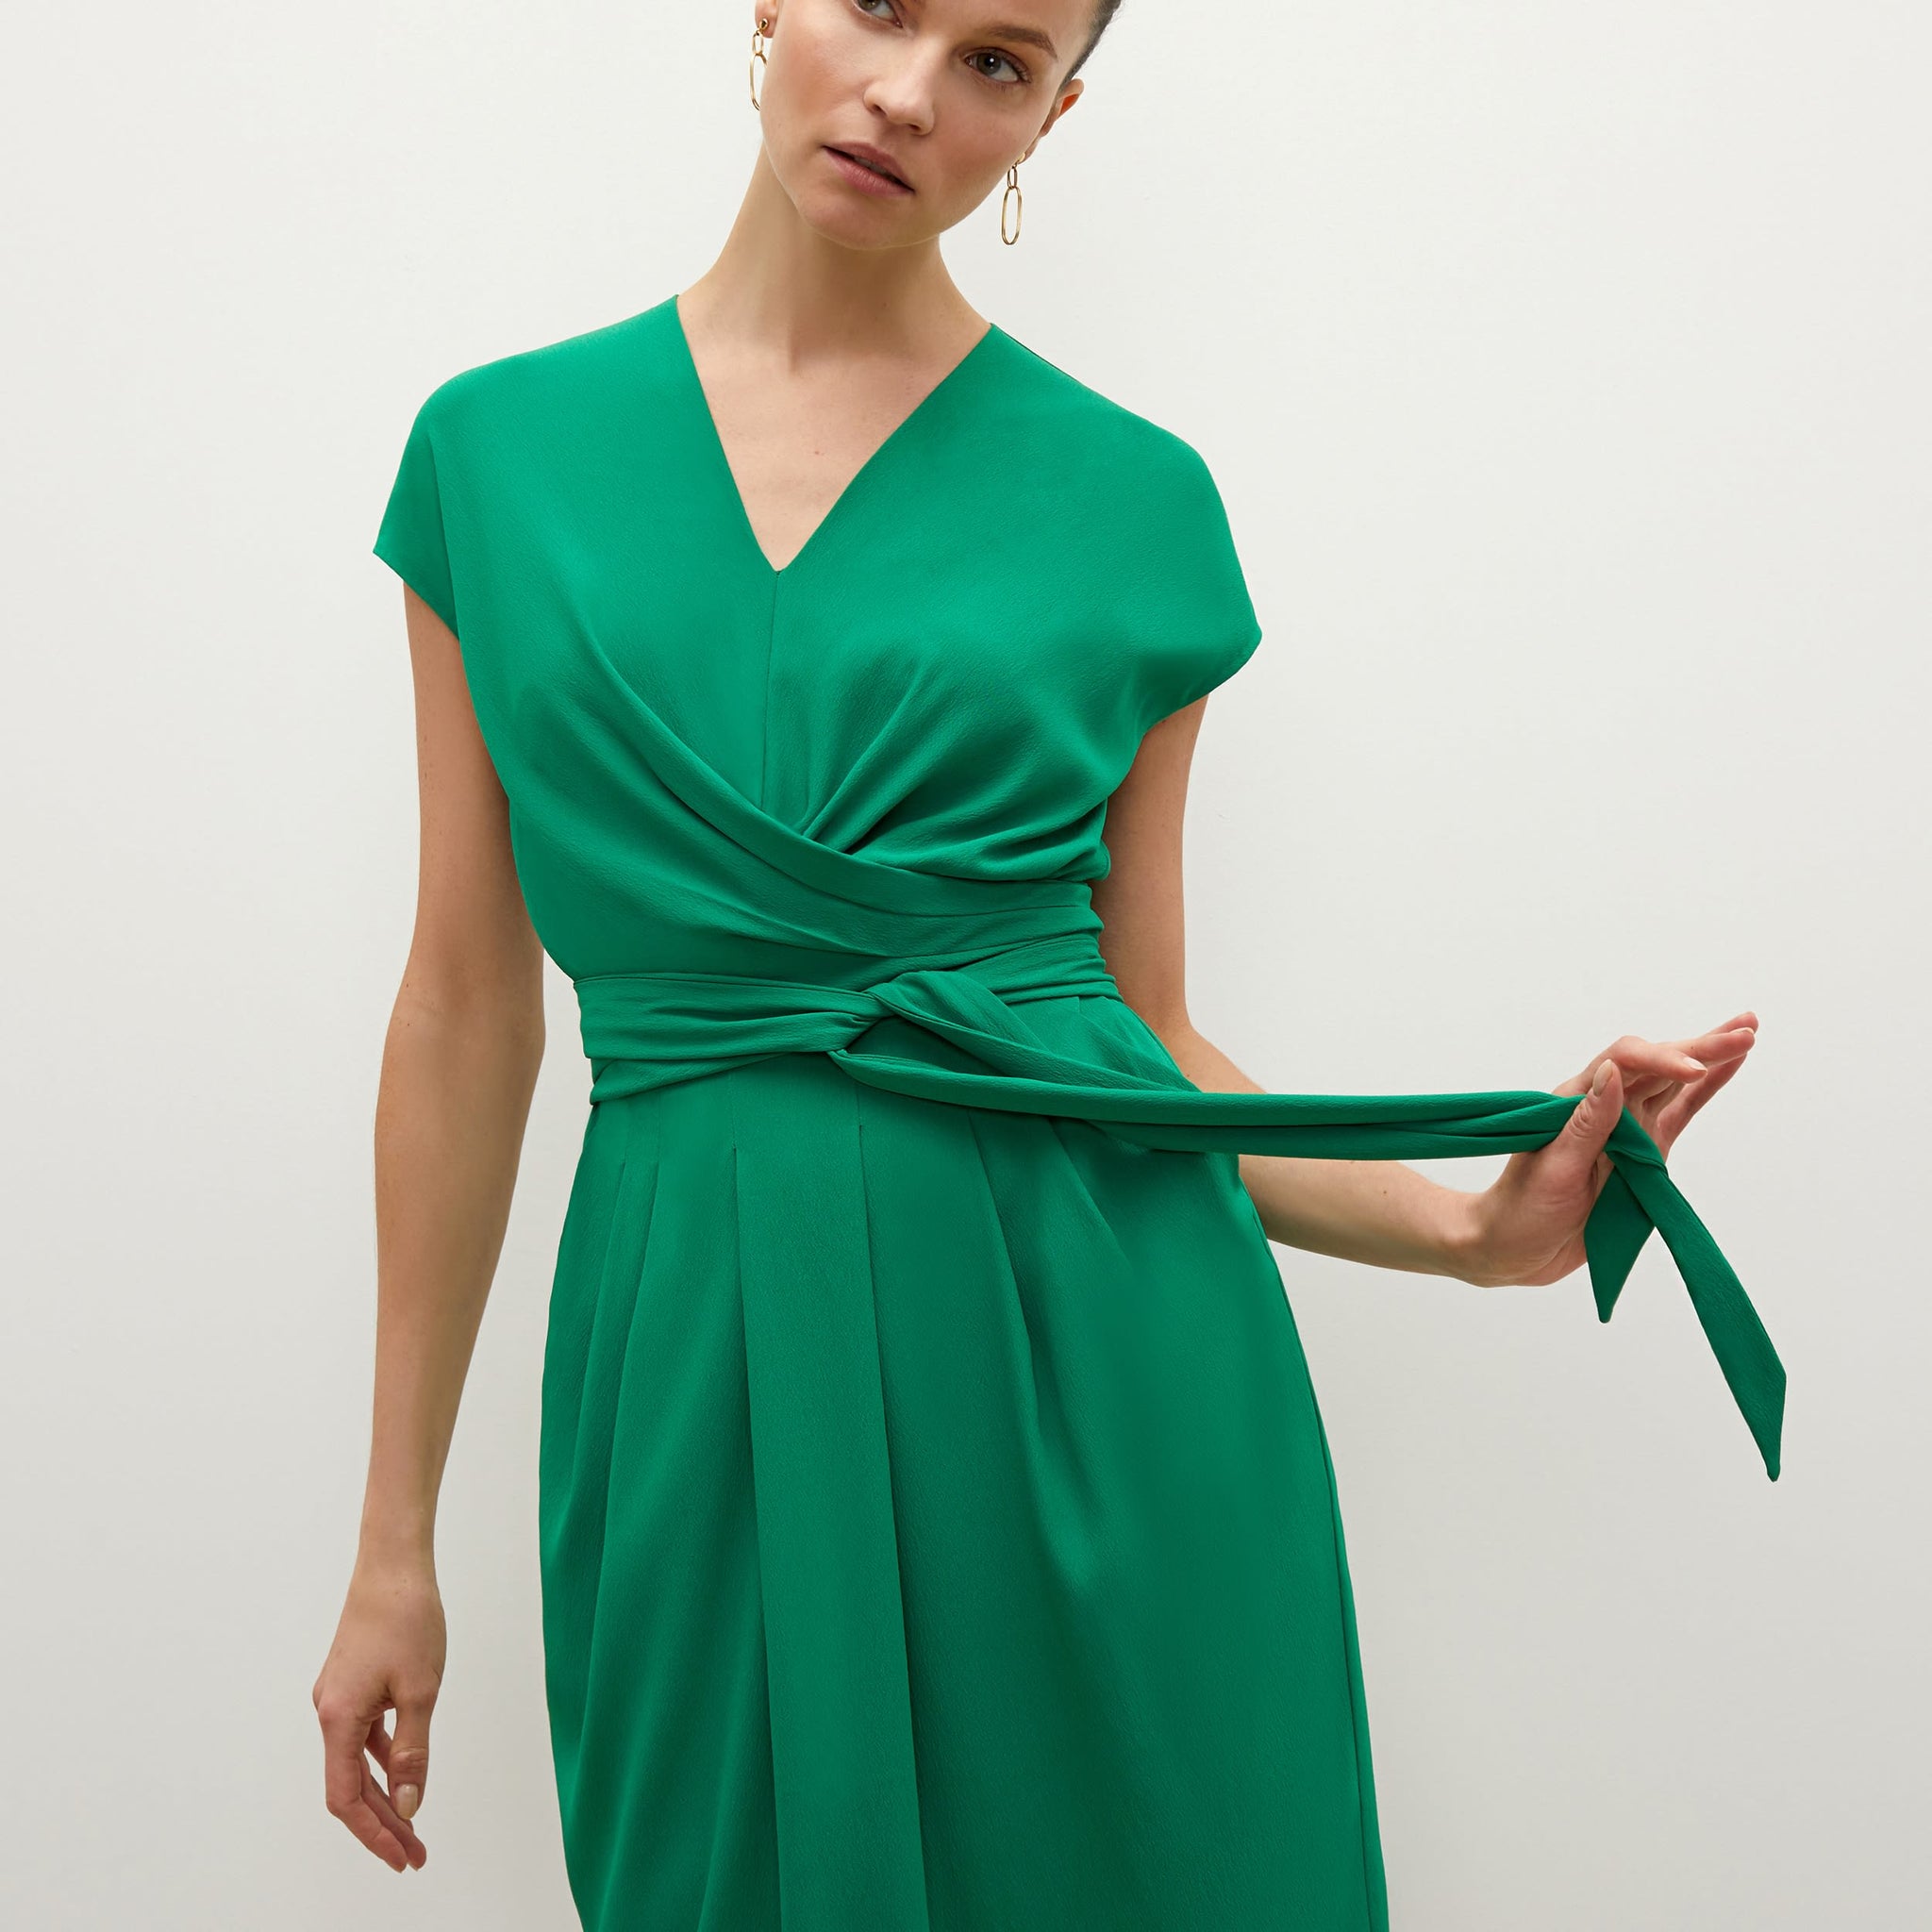 Side image of a woman standing wearing the Noel dress in emerald